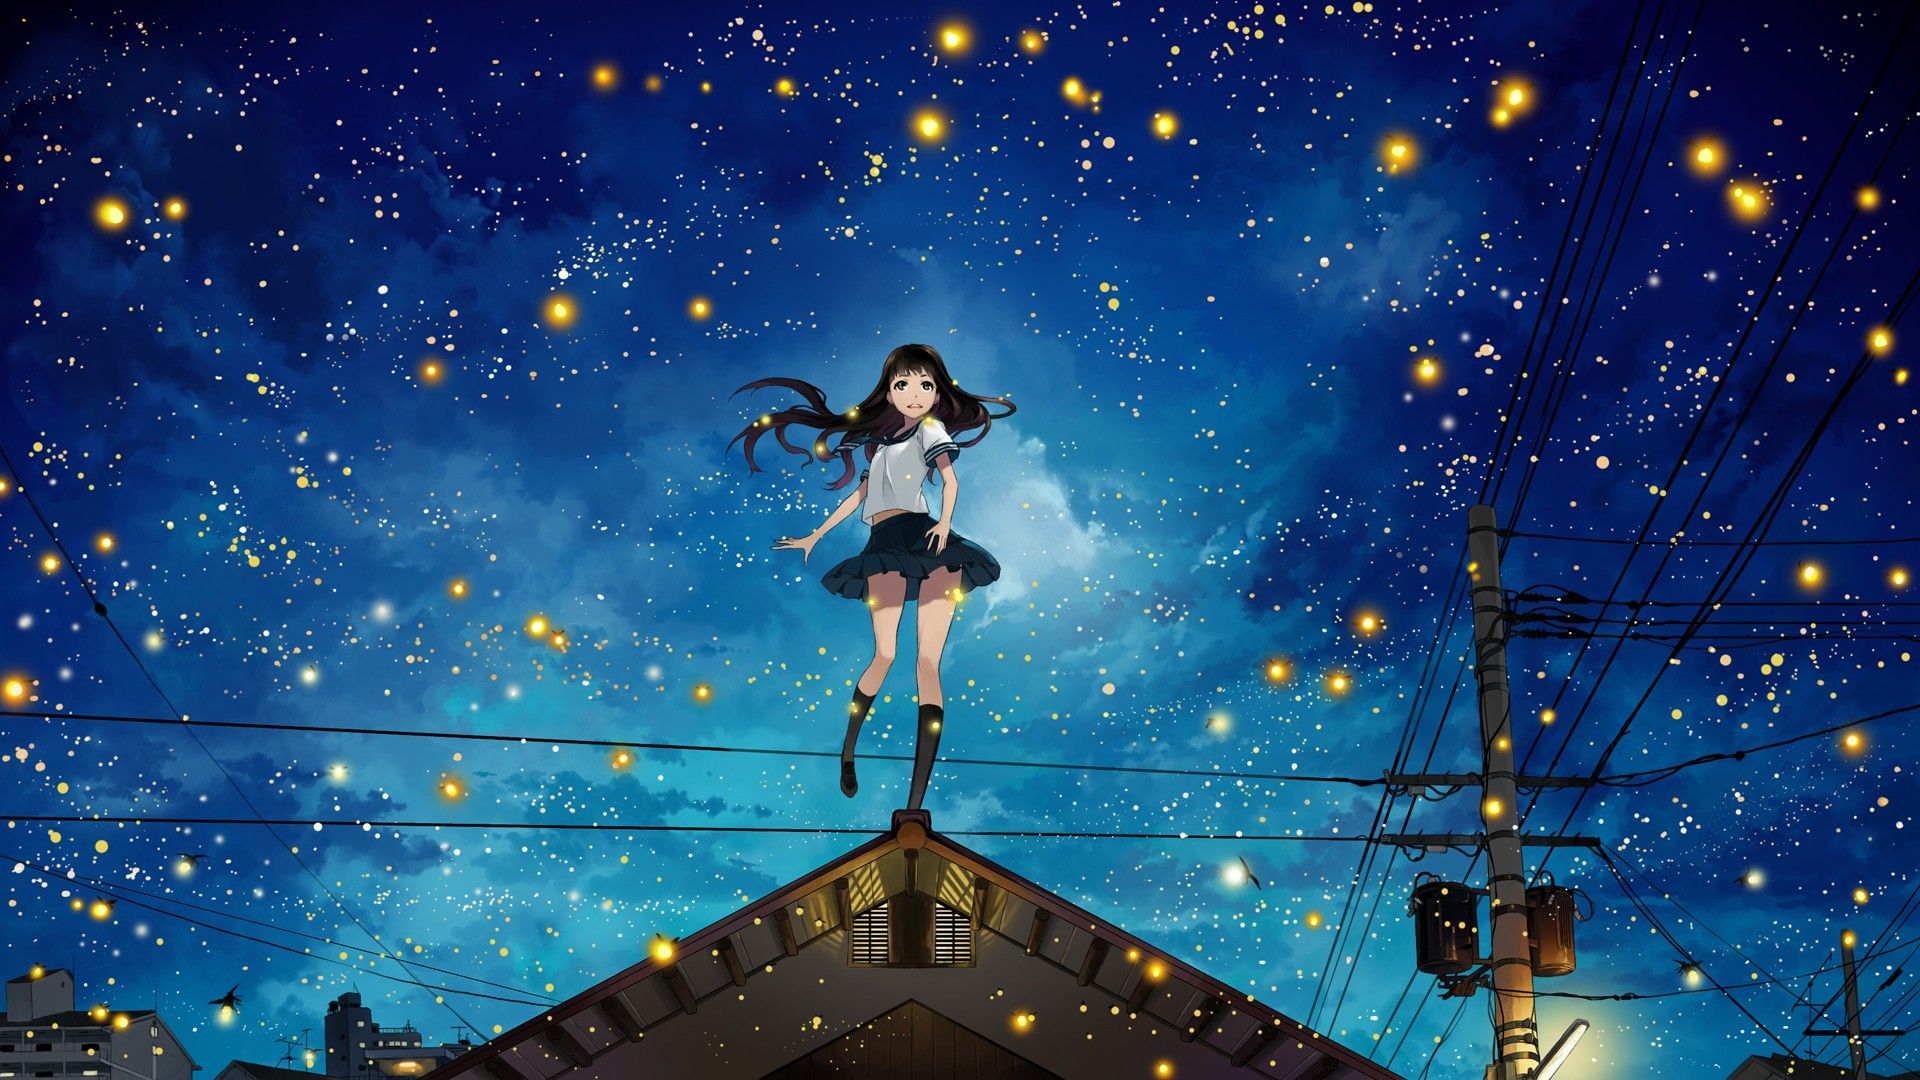 Free download Photo Collection Anime Night Sky With 1920x1080